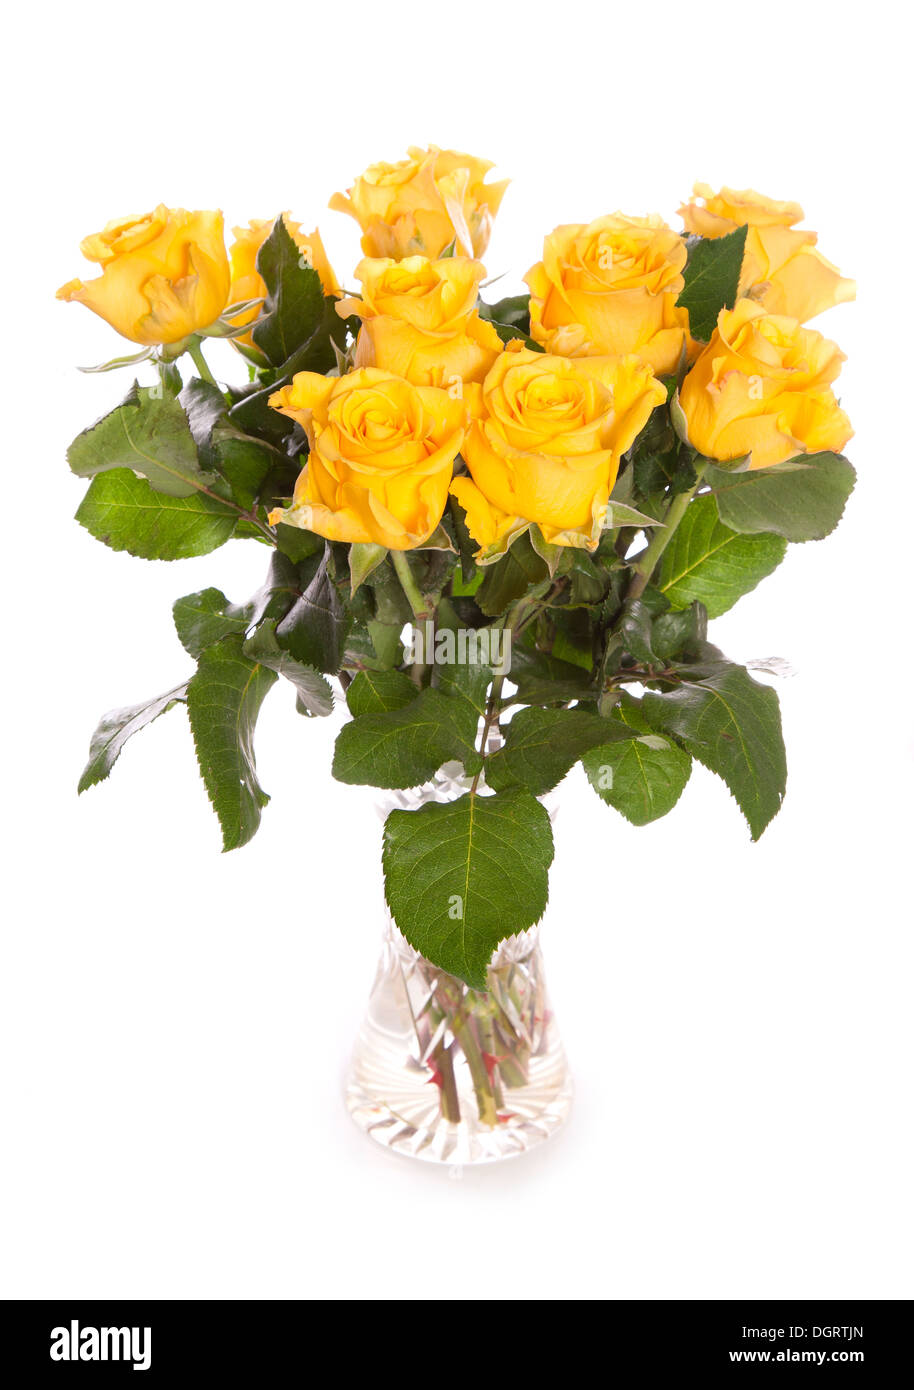 Bunch of yellow roses in a vase white background Stock Photo